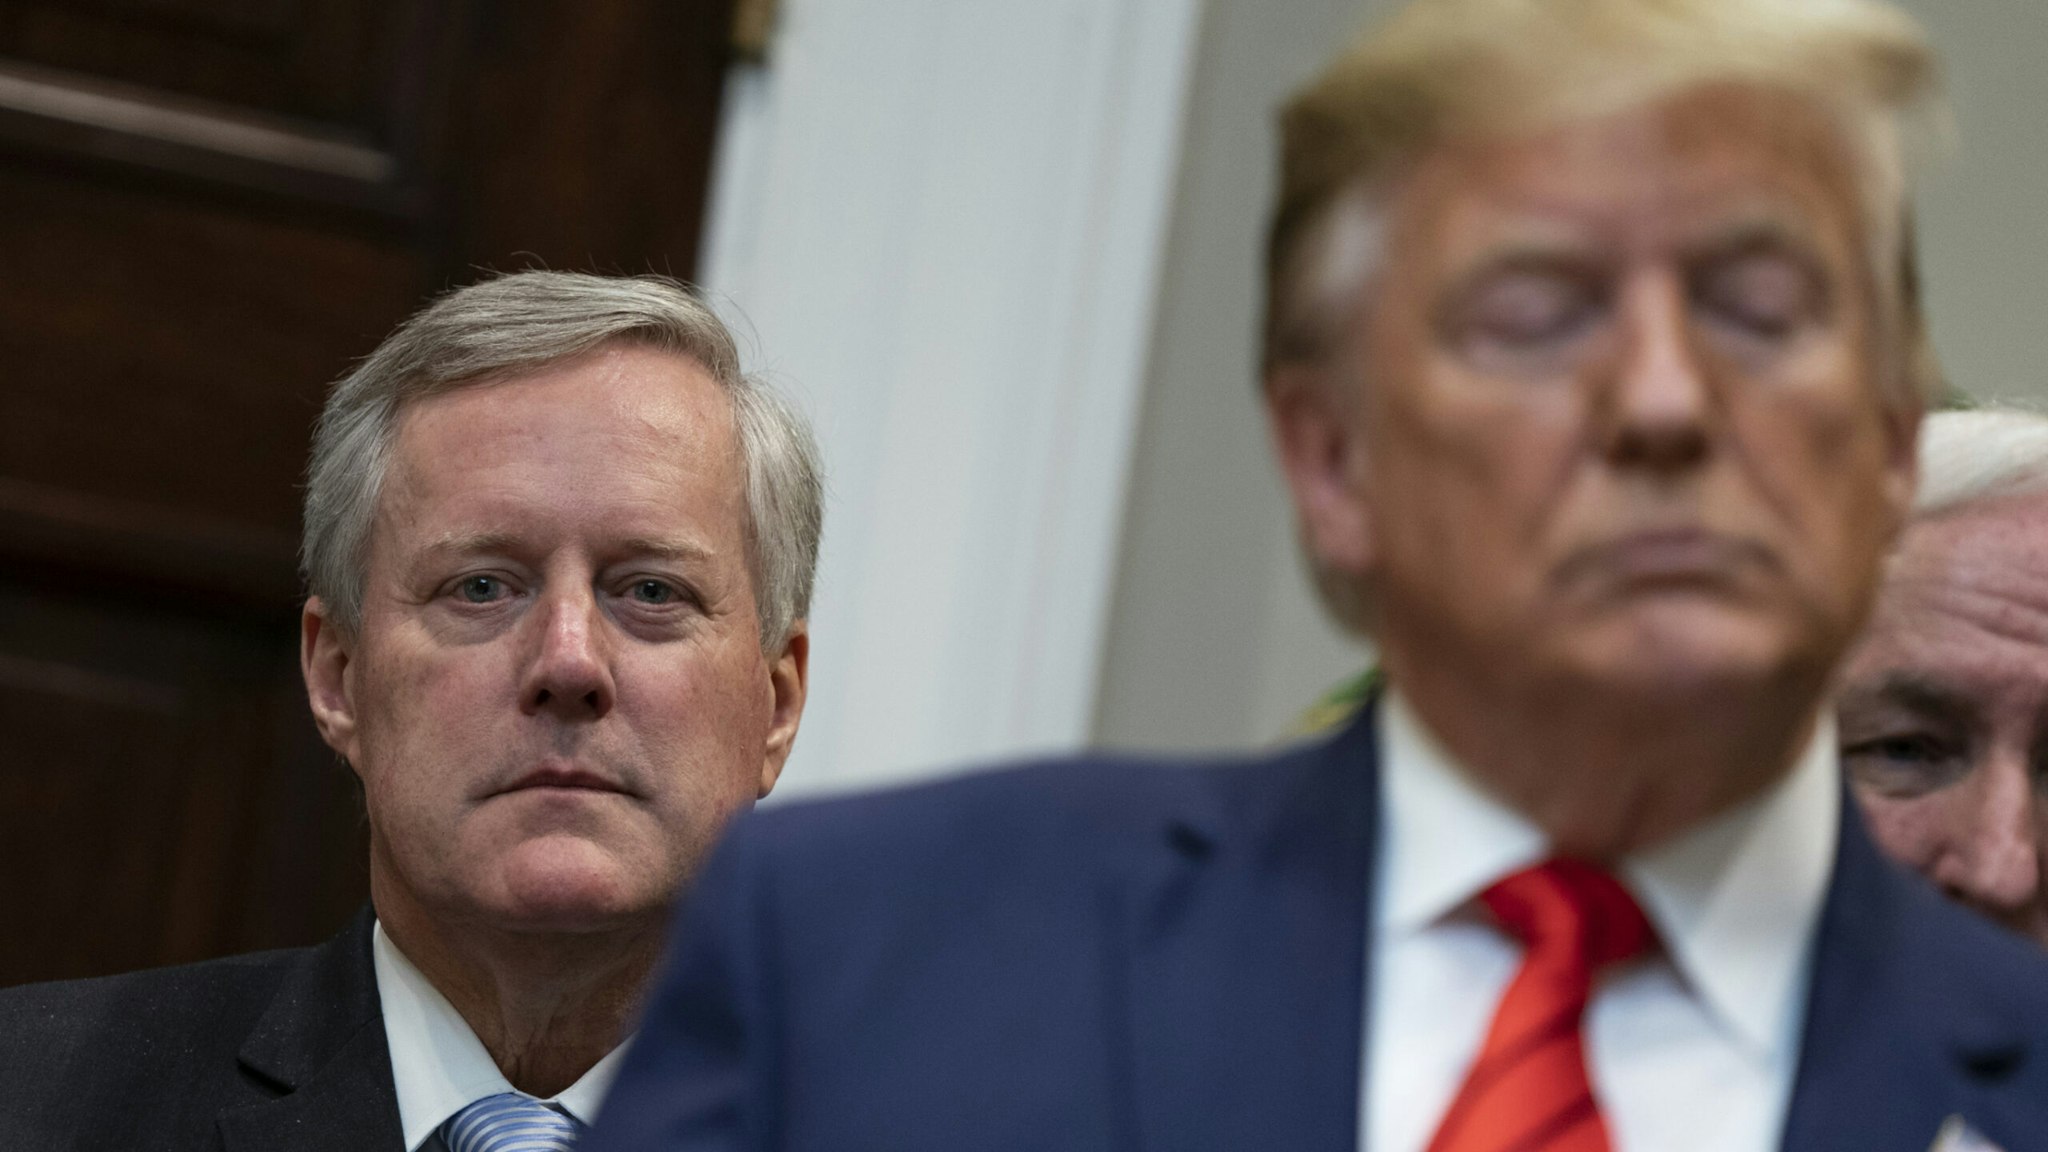 Representative Mark Meadows, a Republican from North Carolina, left, listens during an executive order signing event with U.S. President Donald Trump in the Roosevelt Room of the White House in Washington, D.C., U.S., on Wednesday, October 9, 2019.